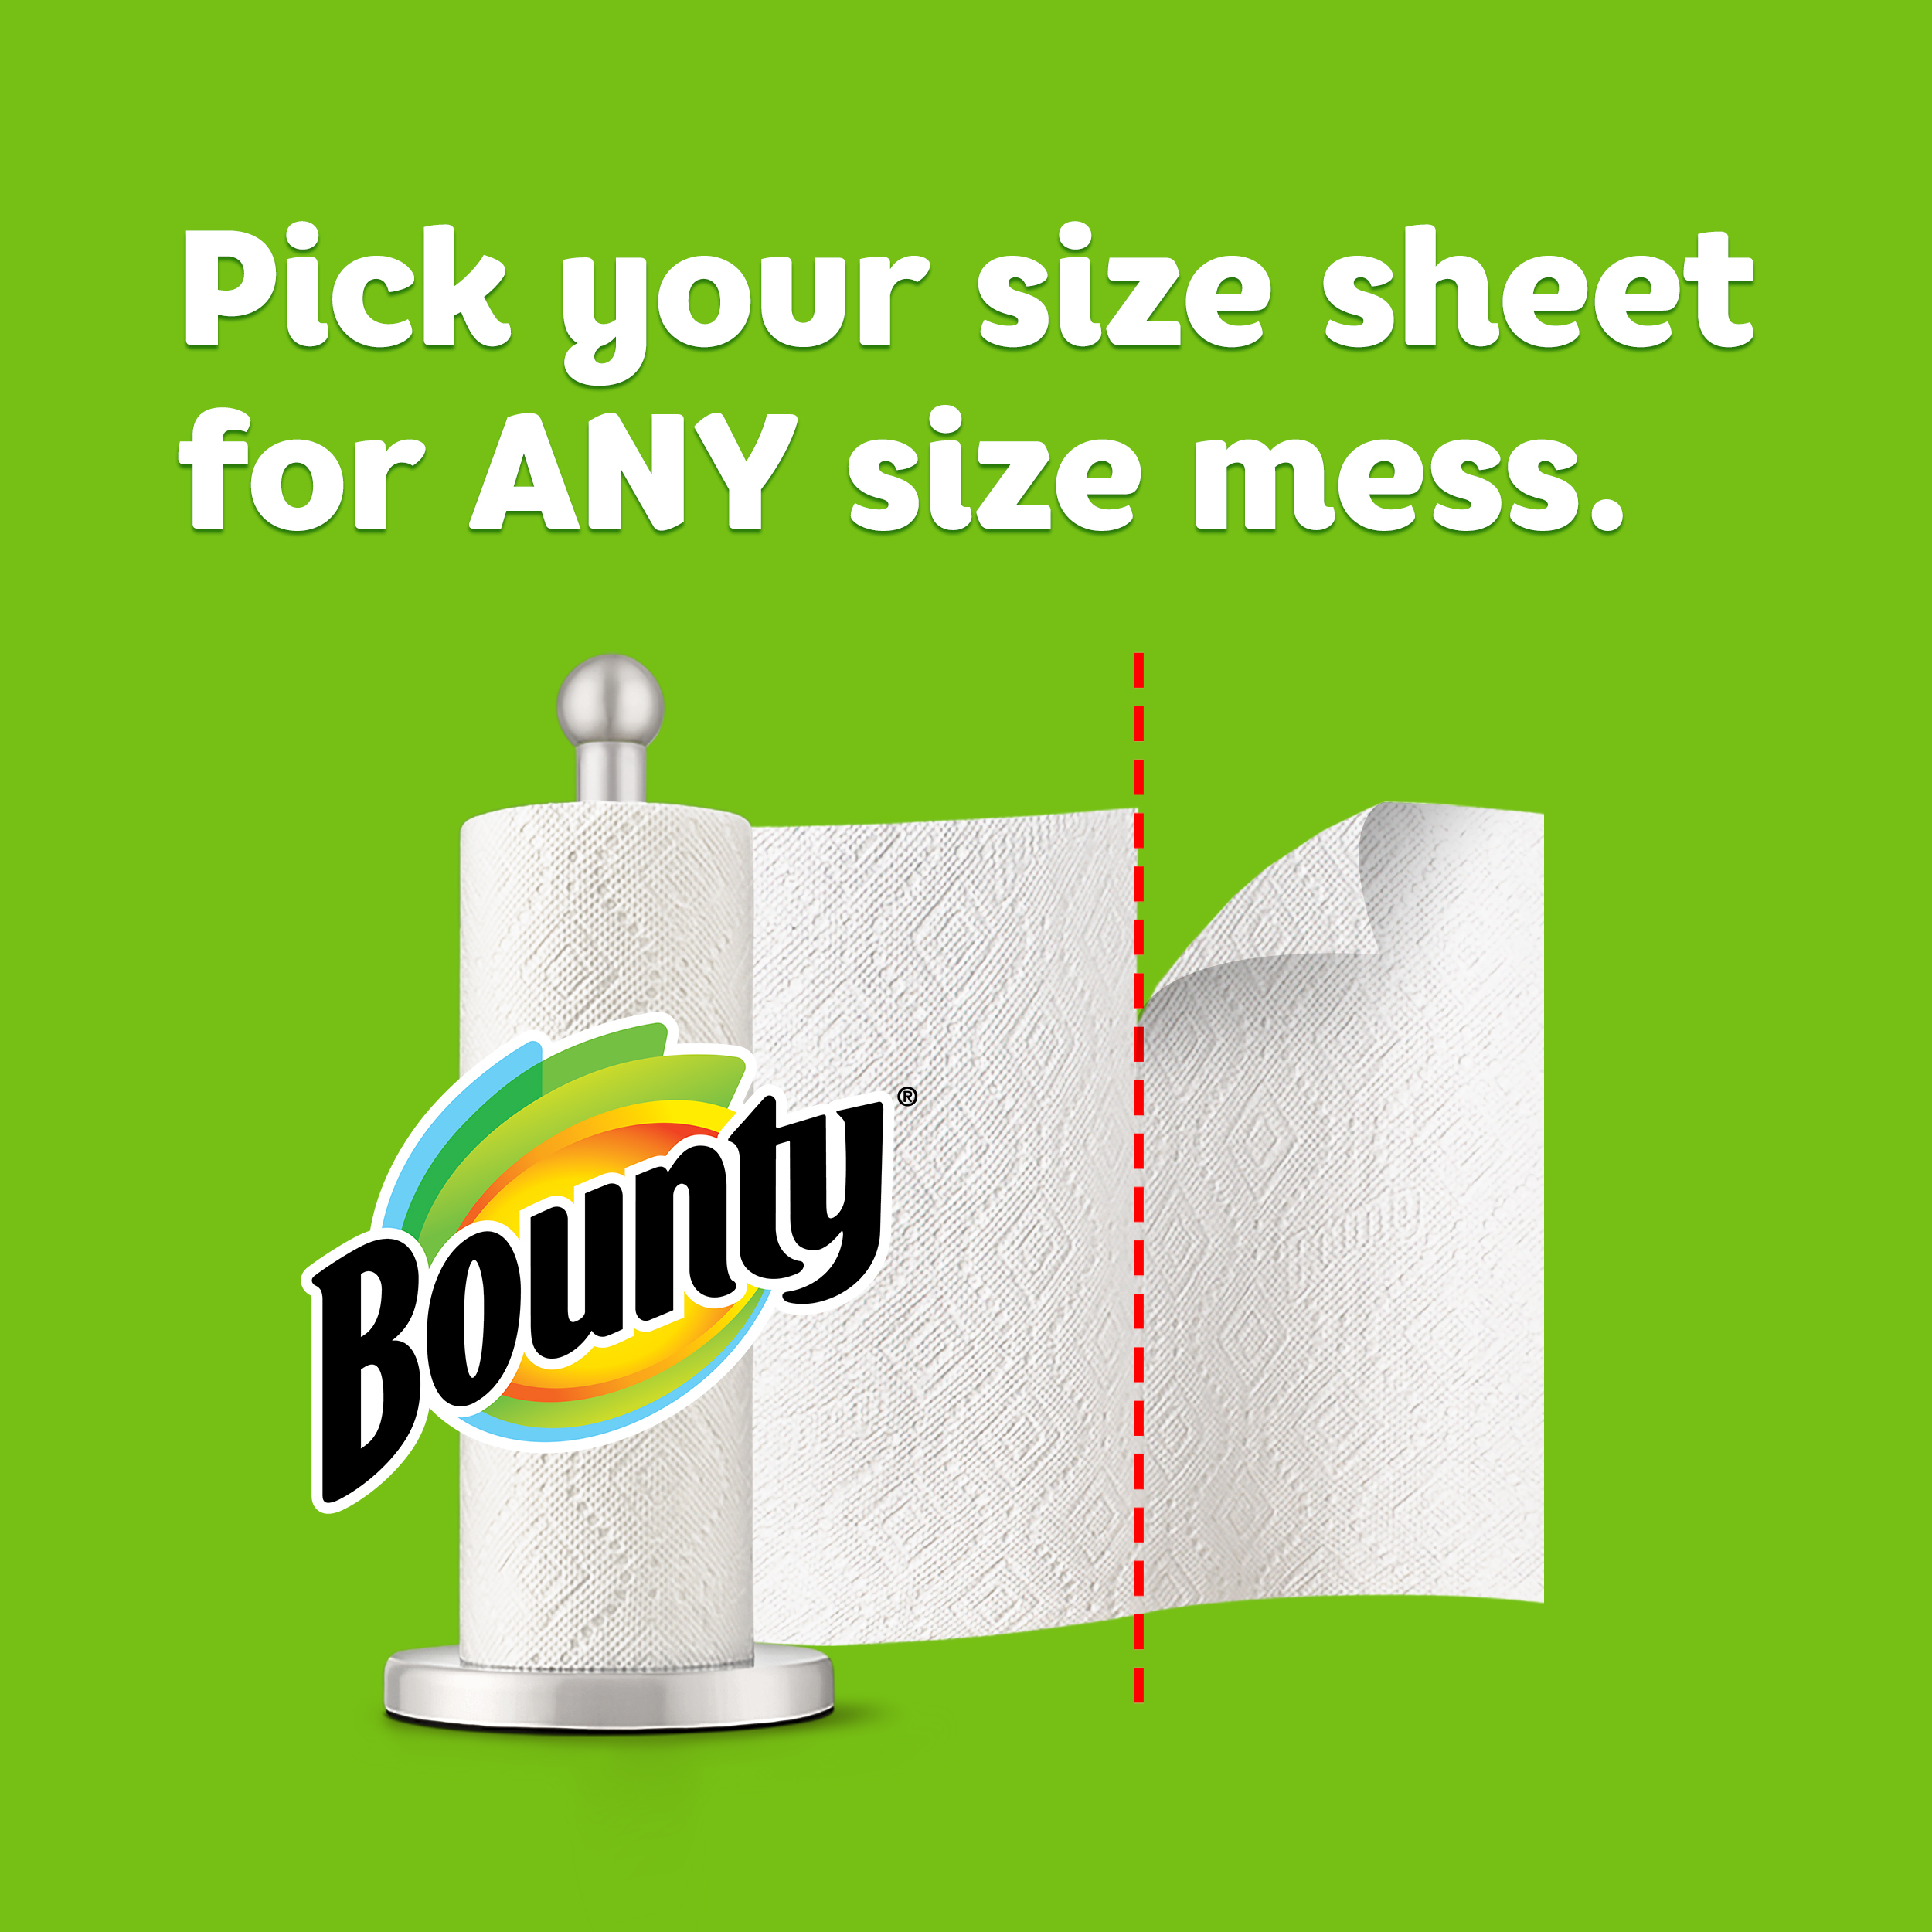 Bounty Select-a-Size Big Roll Paper Towels, 84 sheets, 12 rolls - image 4 of 9